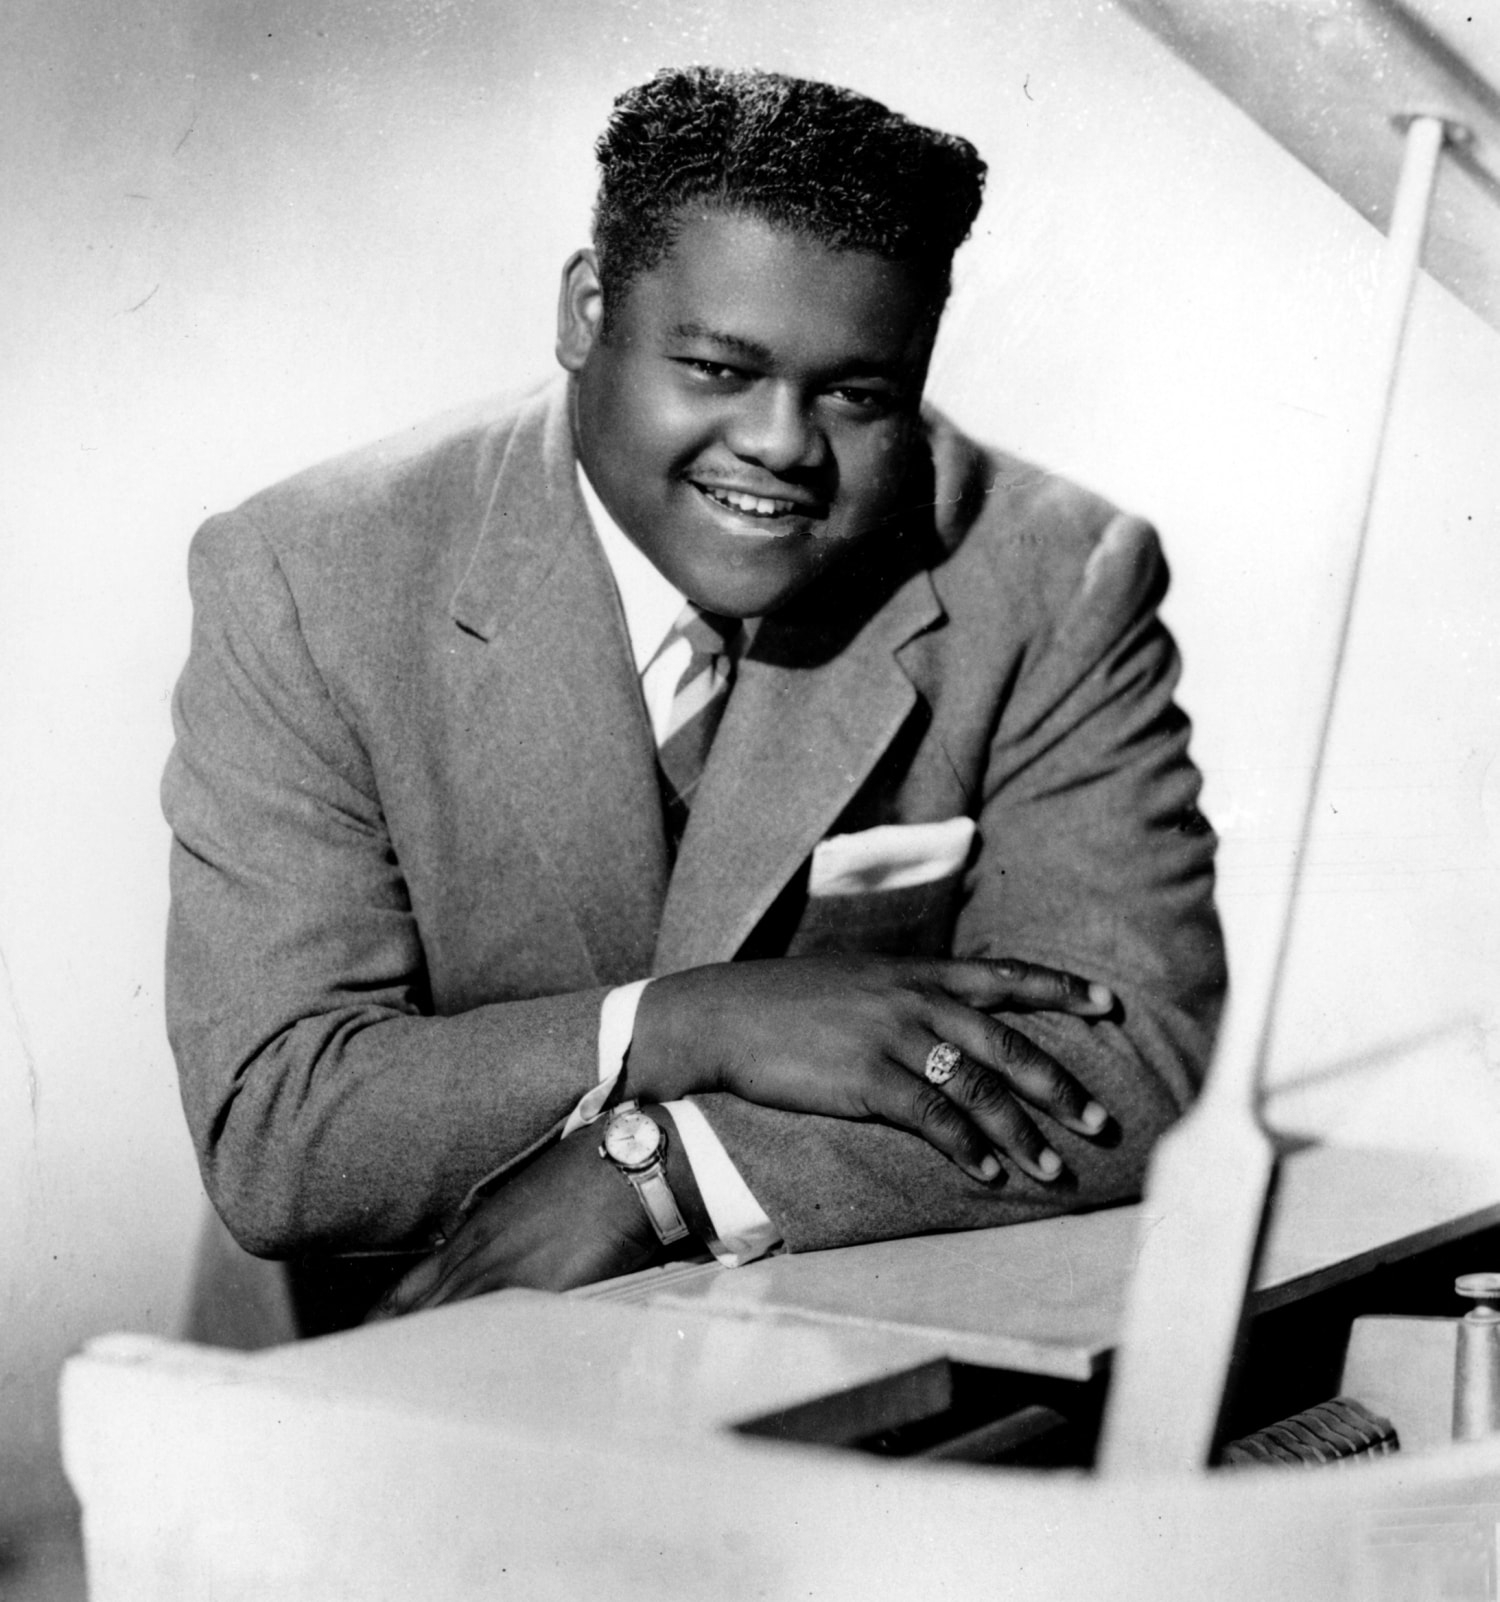 Fats Domino 45 Sweet Patootie bw New Orleans Ain't The Same